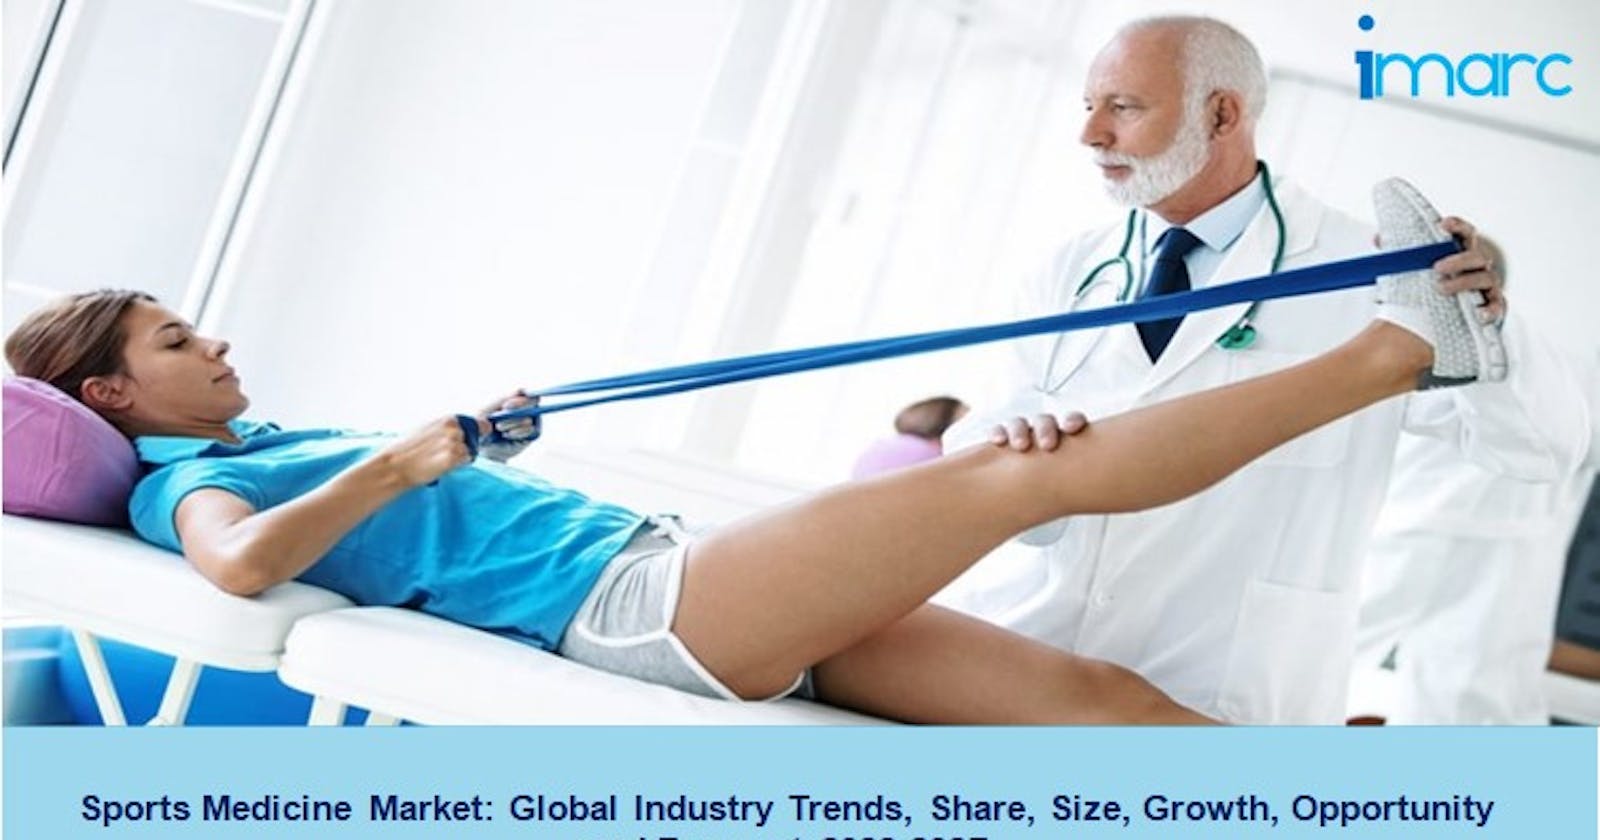 Sports Medicine Market Size, Share, Demand, Growth and Forecast 2022-2027